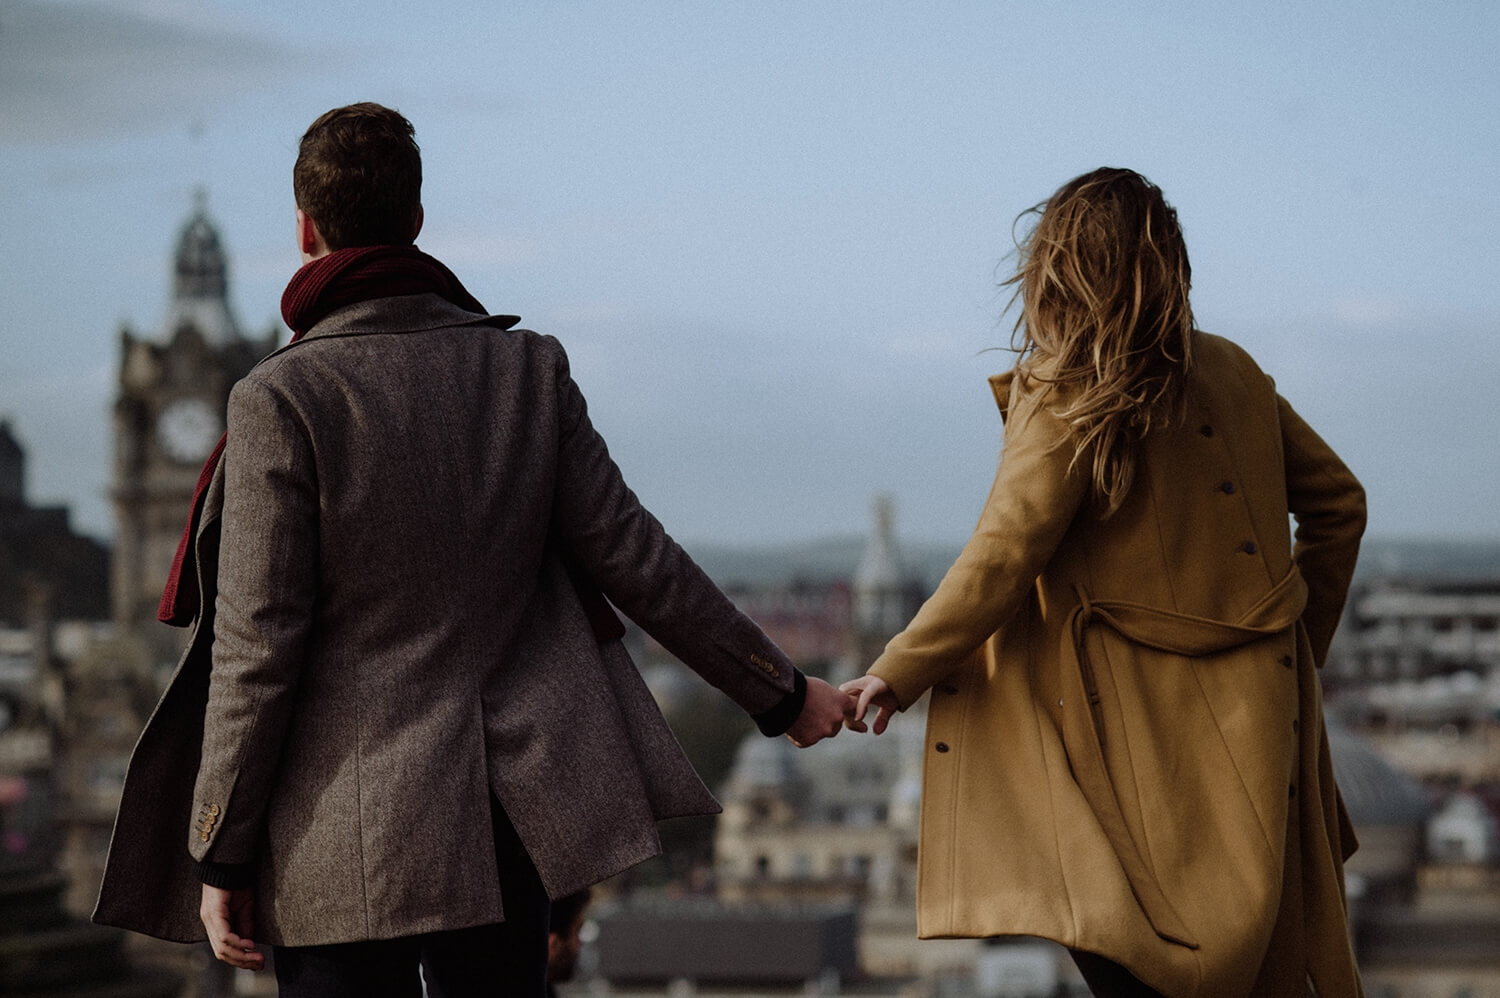 Couple photography with Edinburgh in the background.